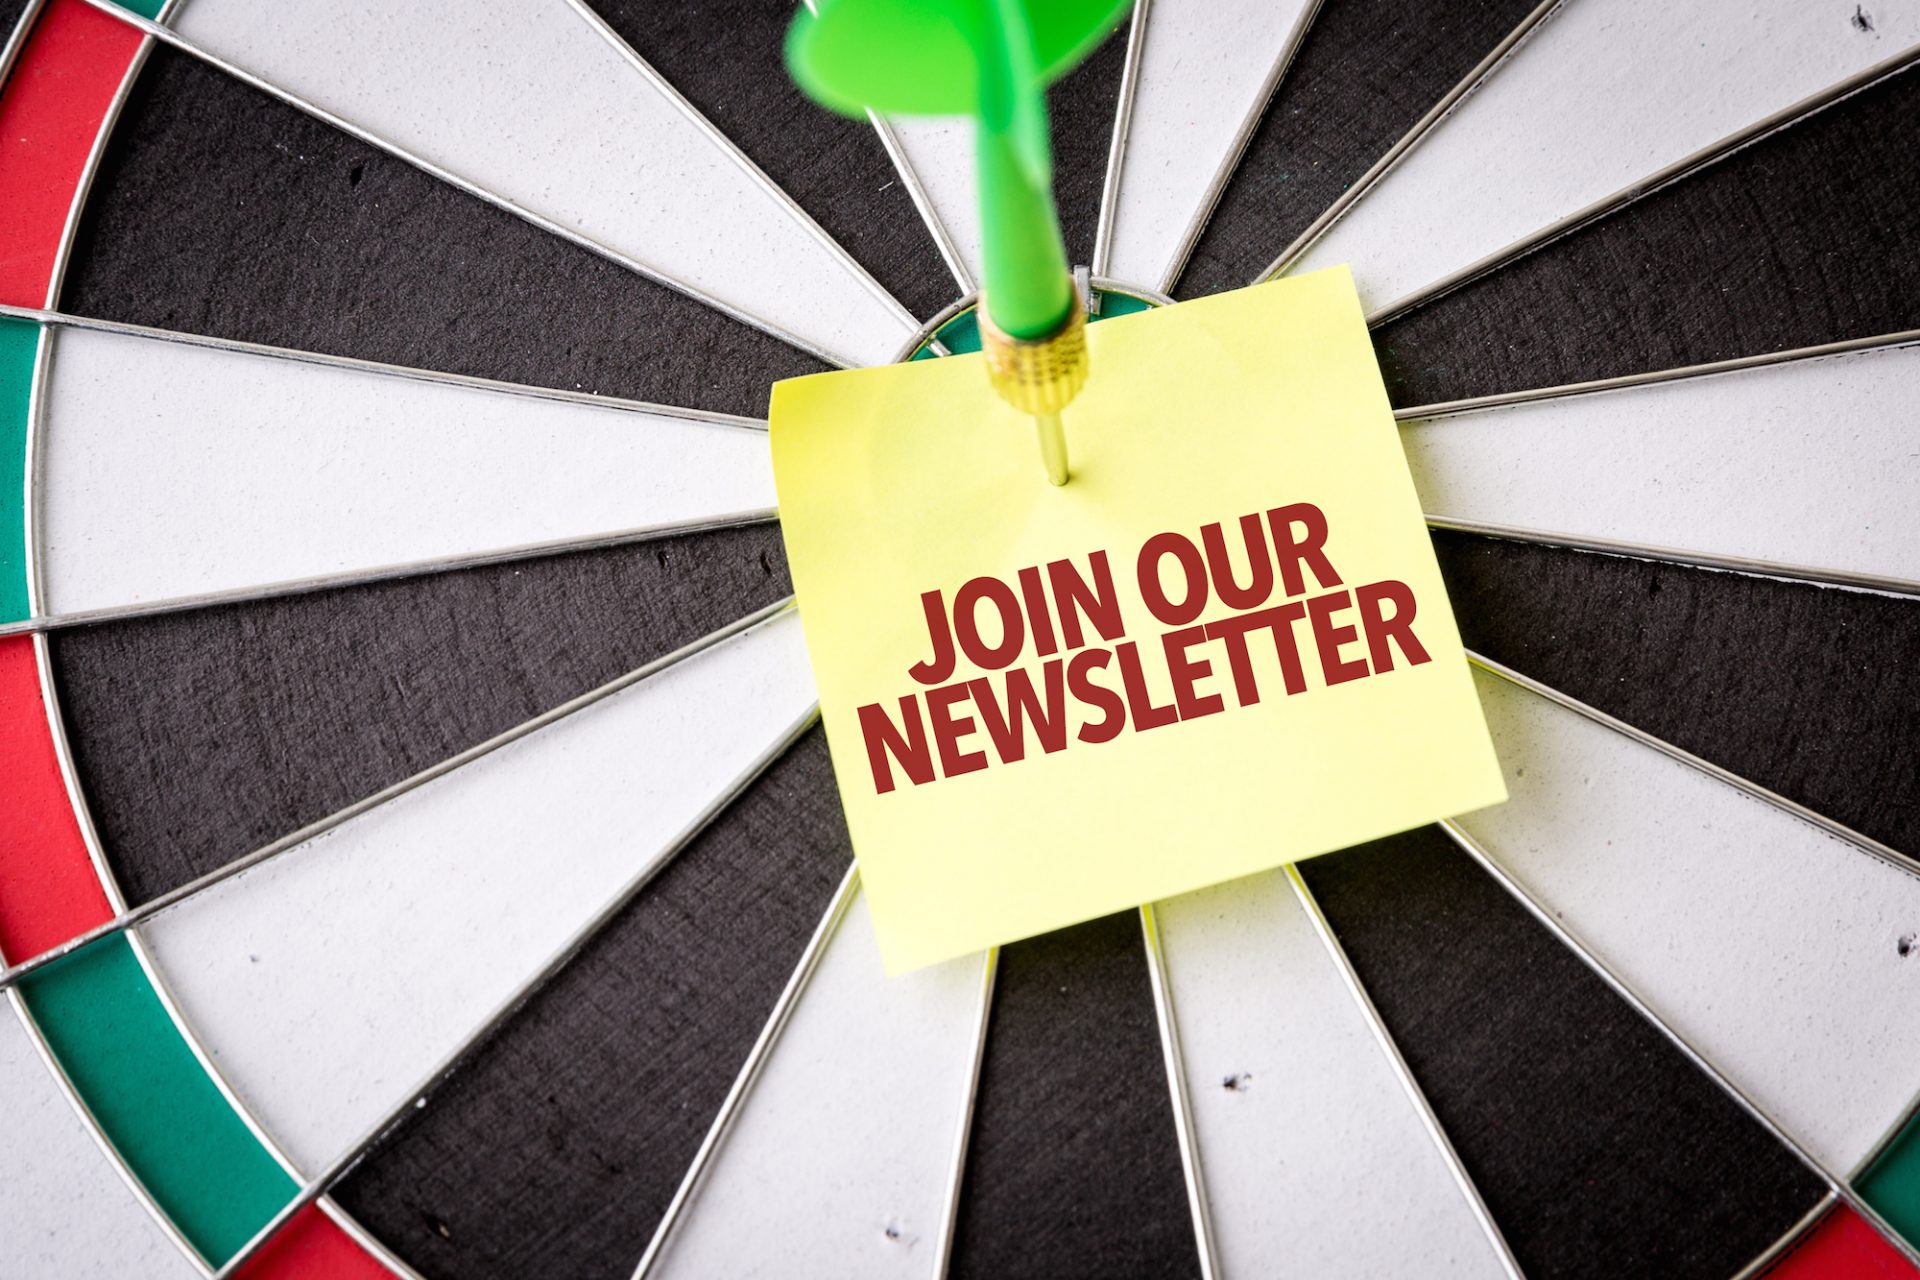 Join our newsletter and get email subscribers.